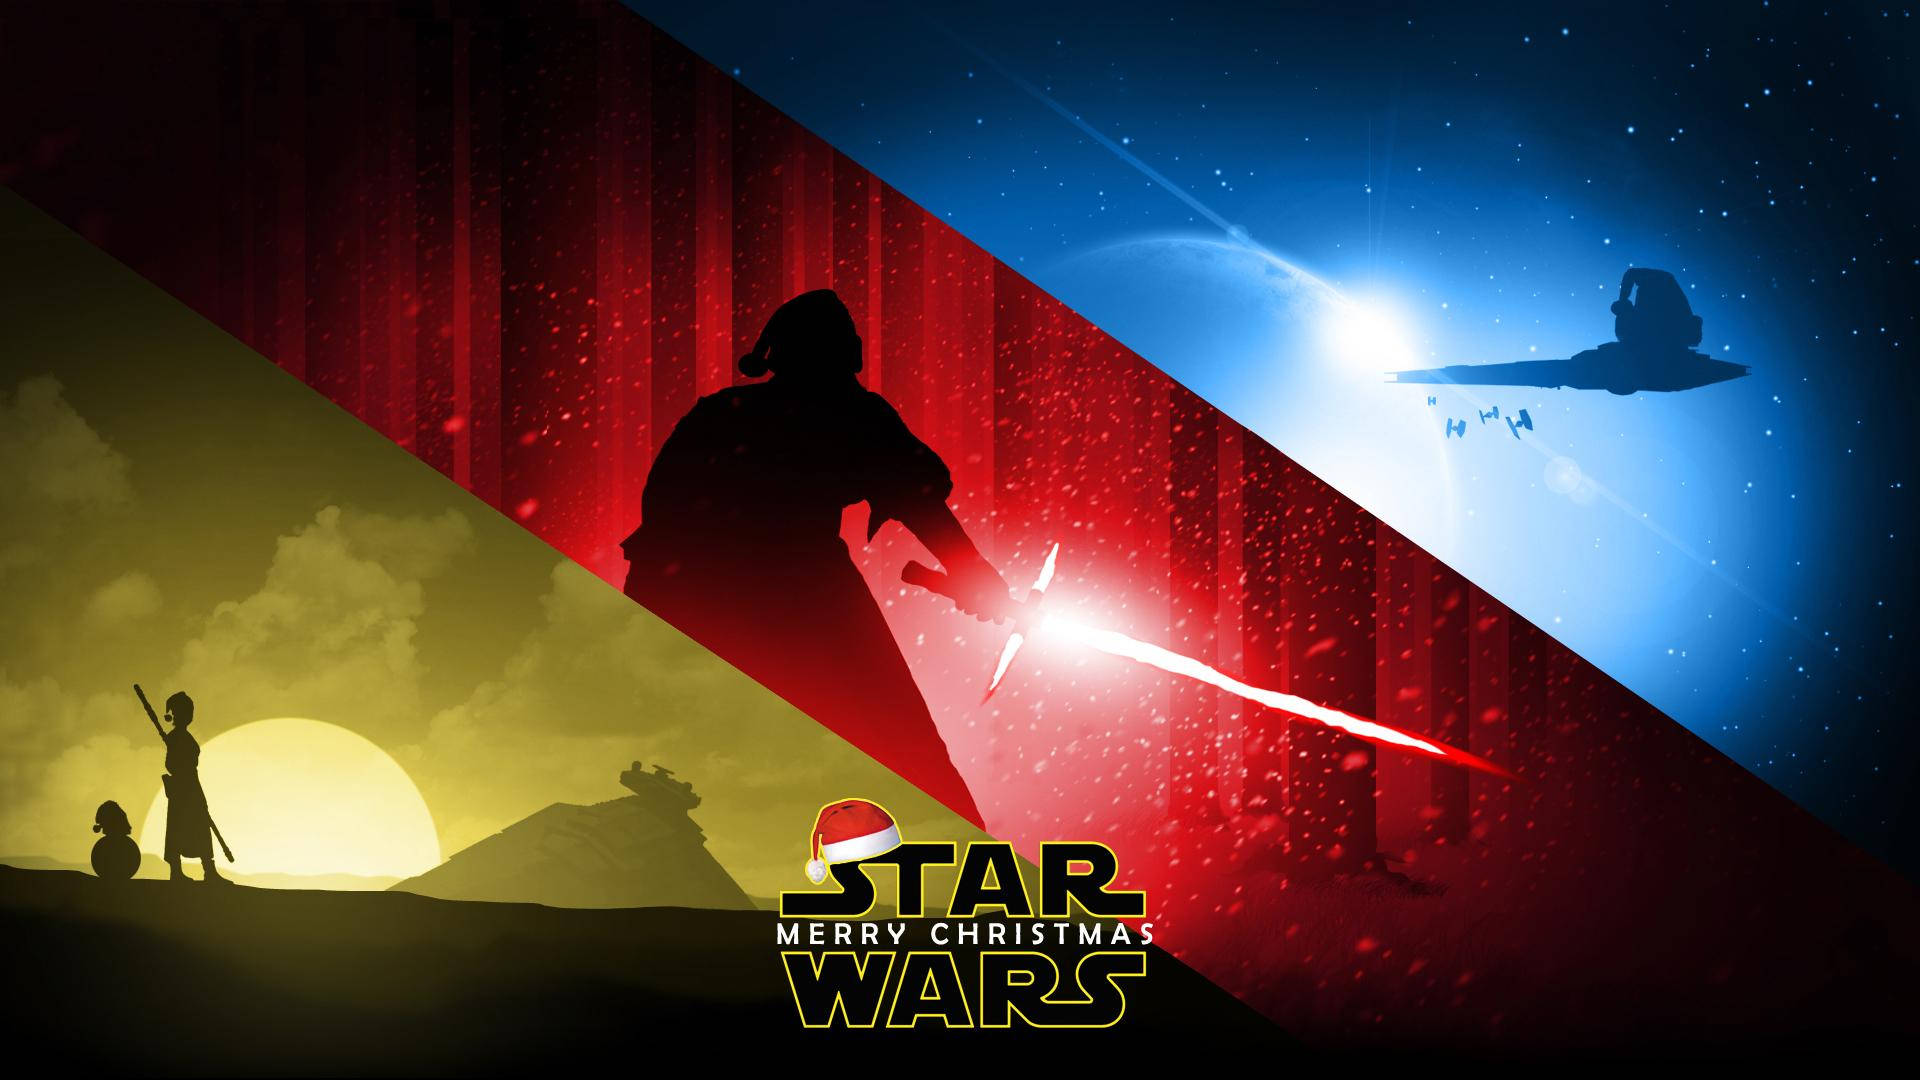 Light Up The Holiday Season With Star Wars! Background